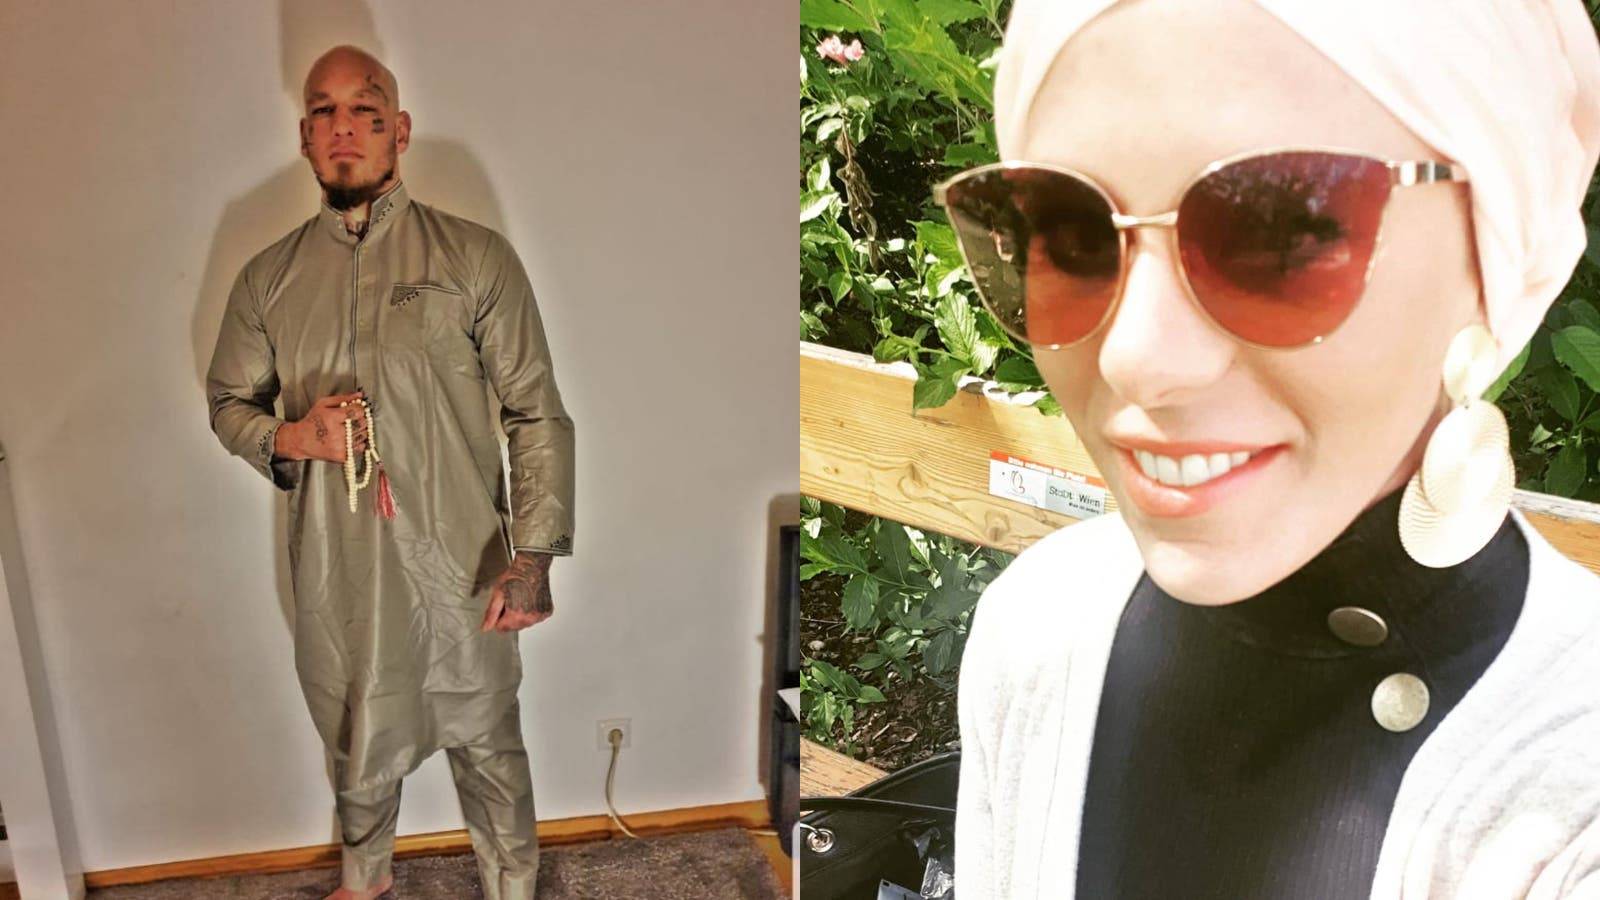 Wife of Austrian MMA fighter Ott Fired From Job After Converting to Islam